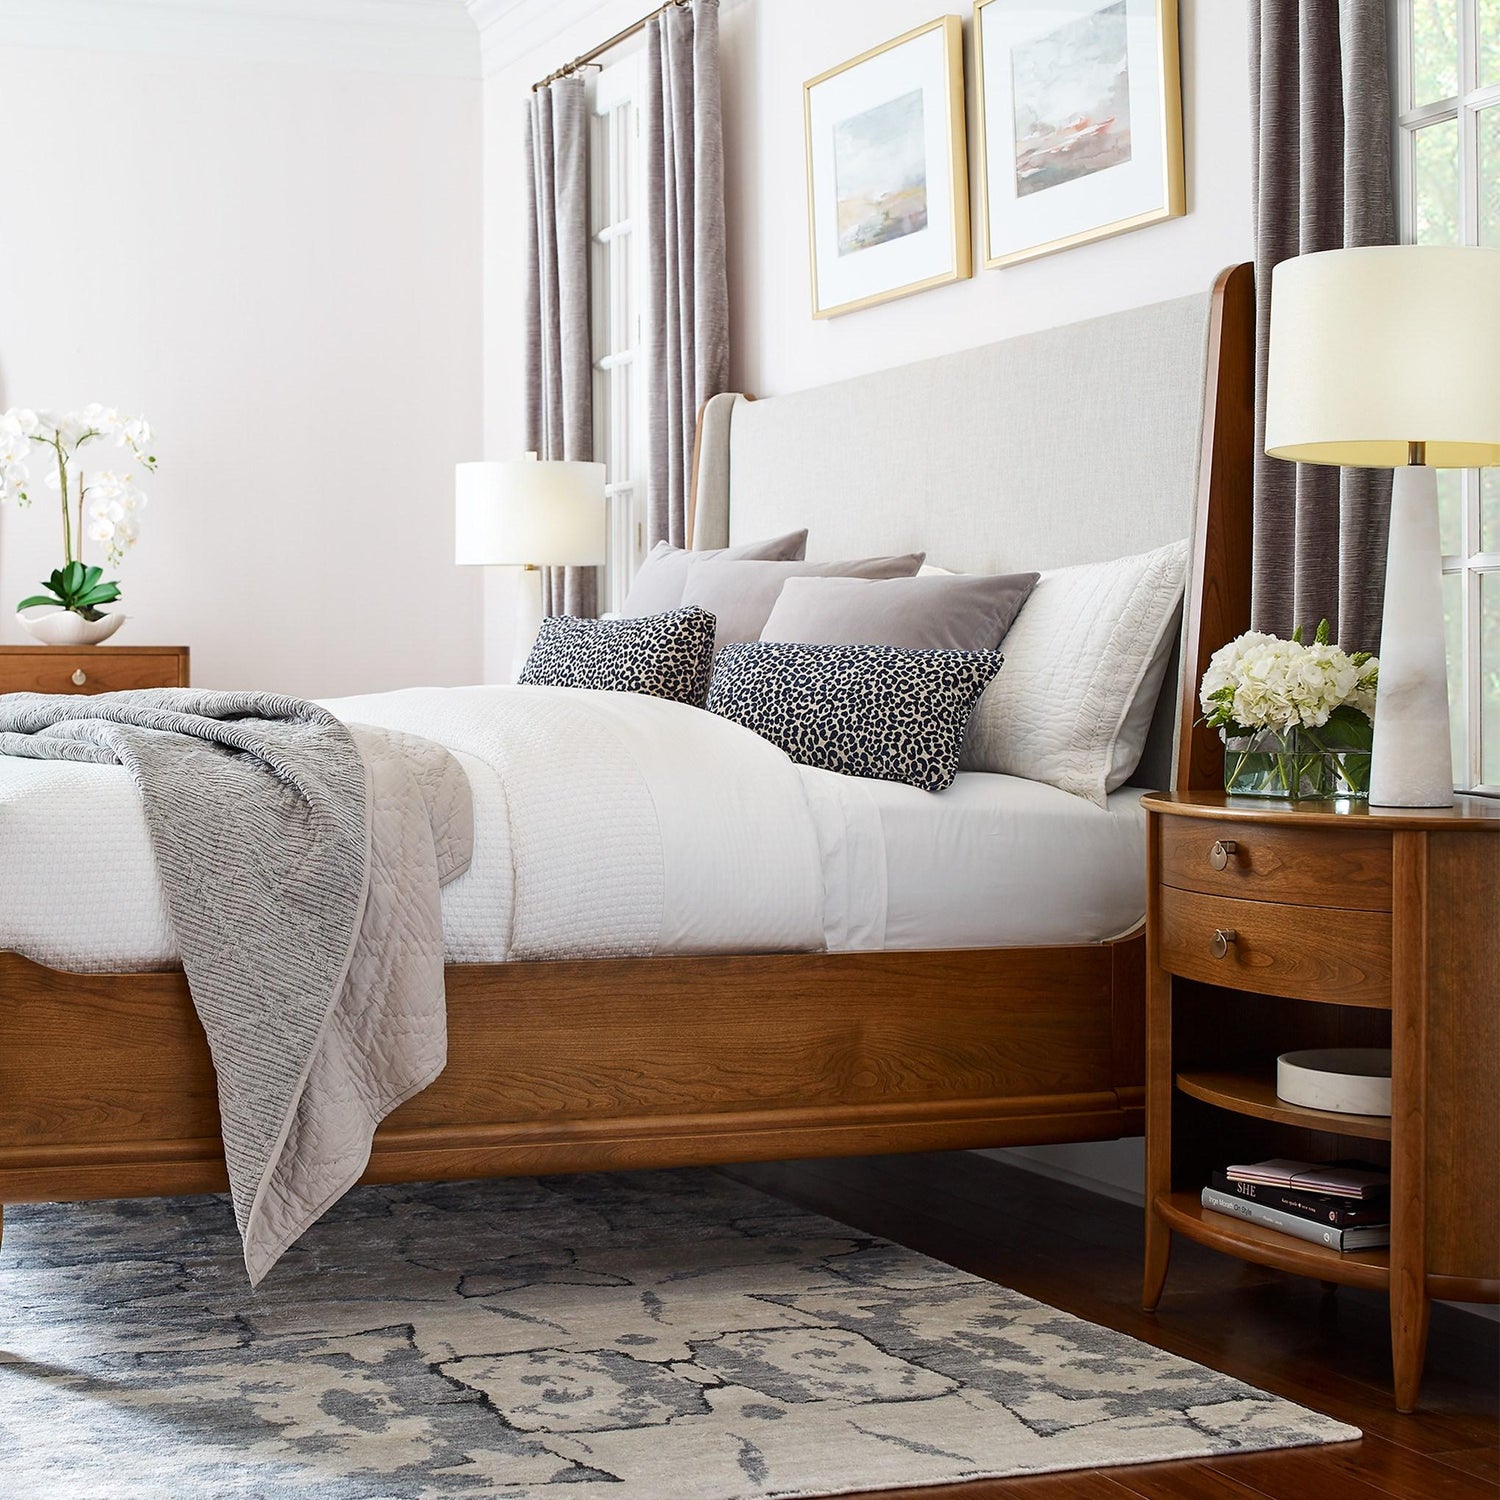 15 Game-Changing West Elm Shopping Secrets From an Insider